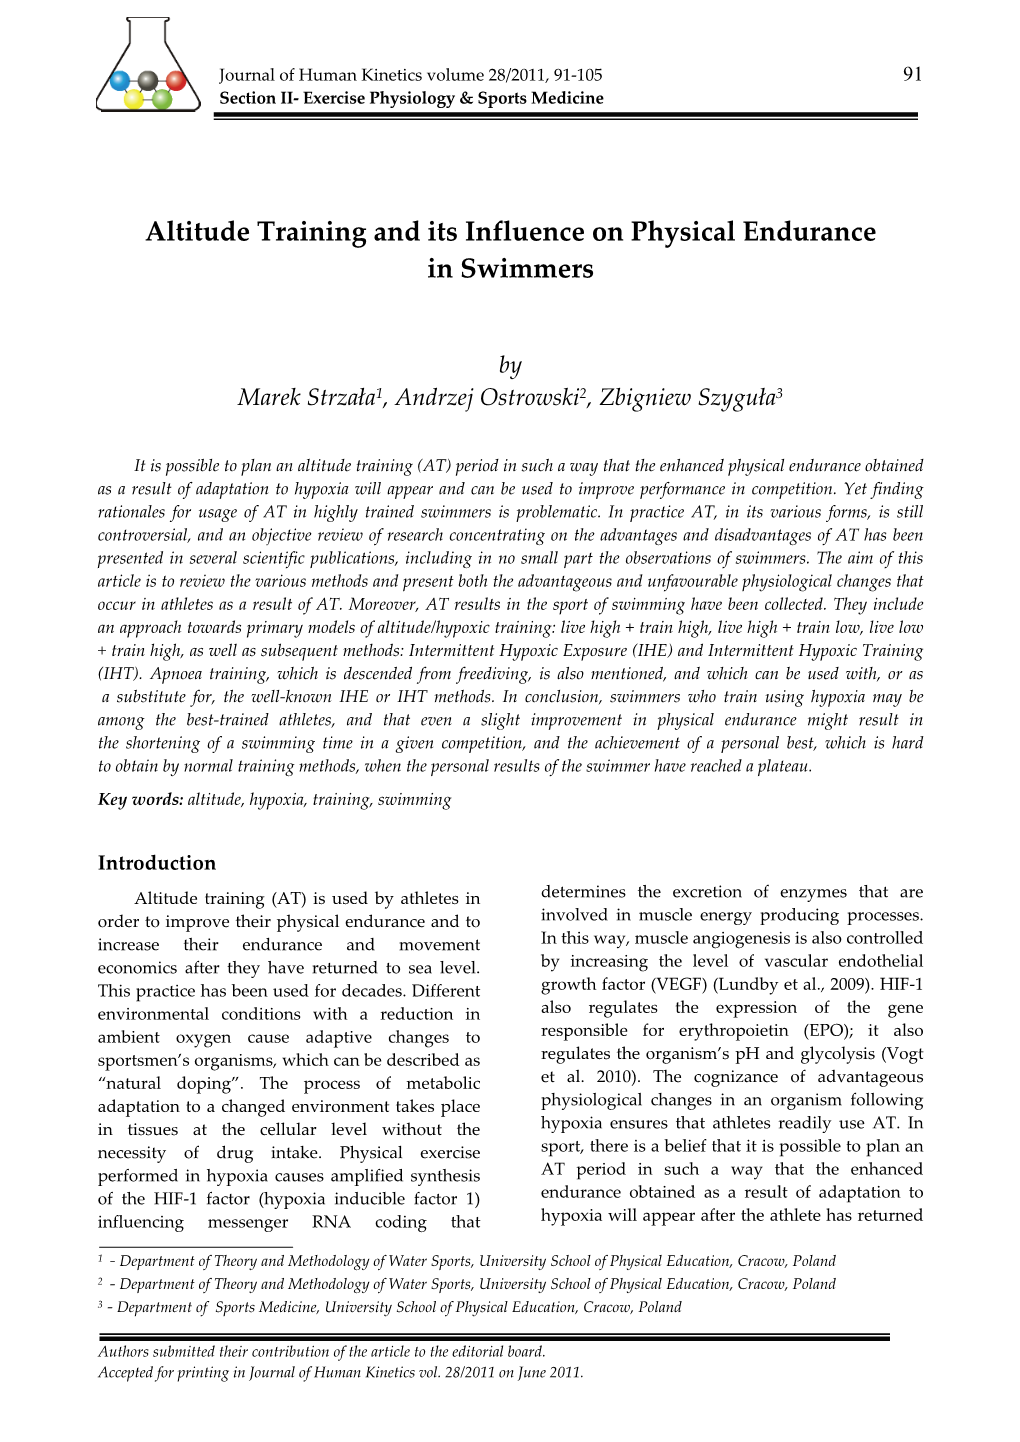 Altitude Training and Its Influence on Physical Endurance in Swimmers